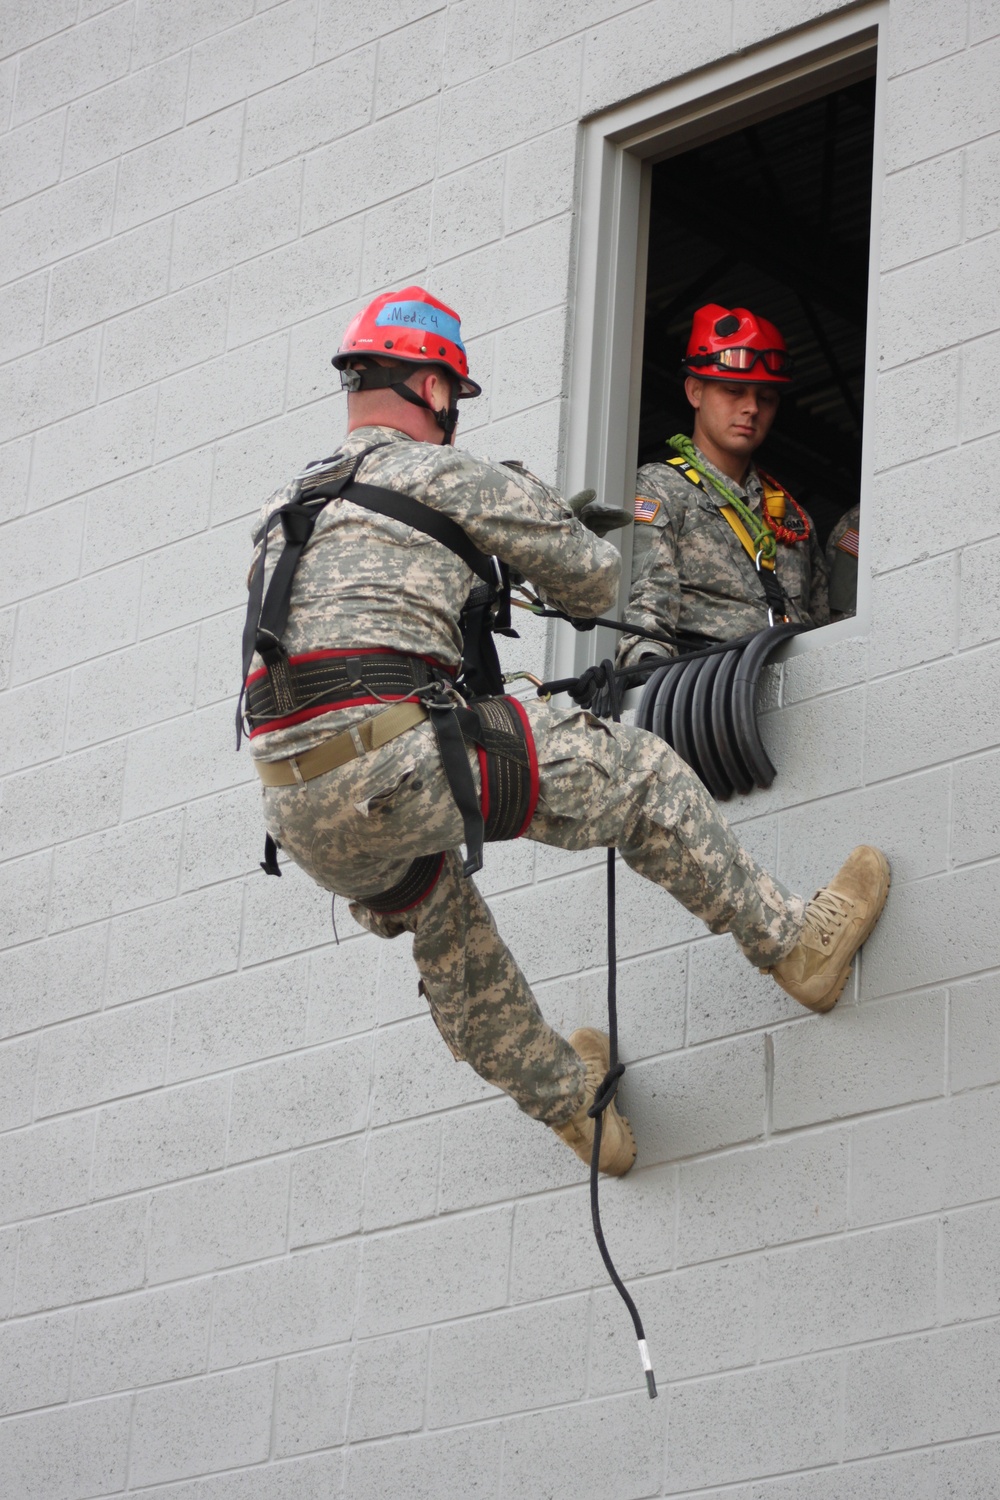 Search and Extraction, Rappelling